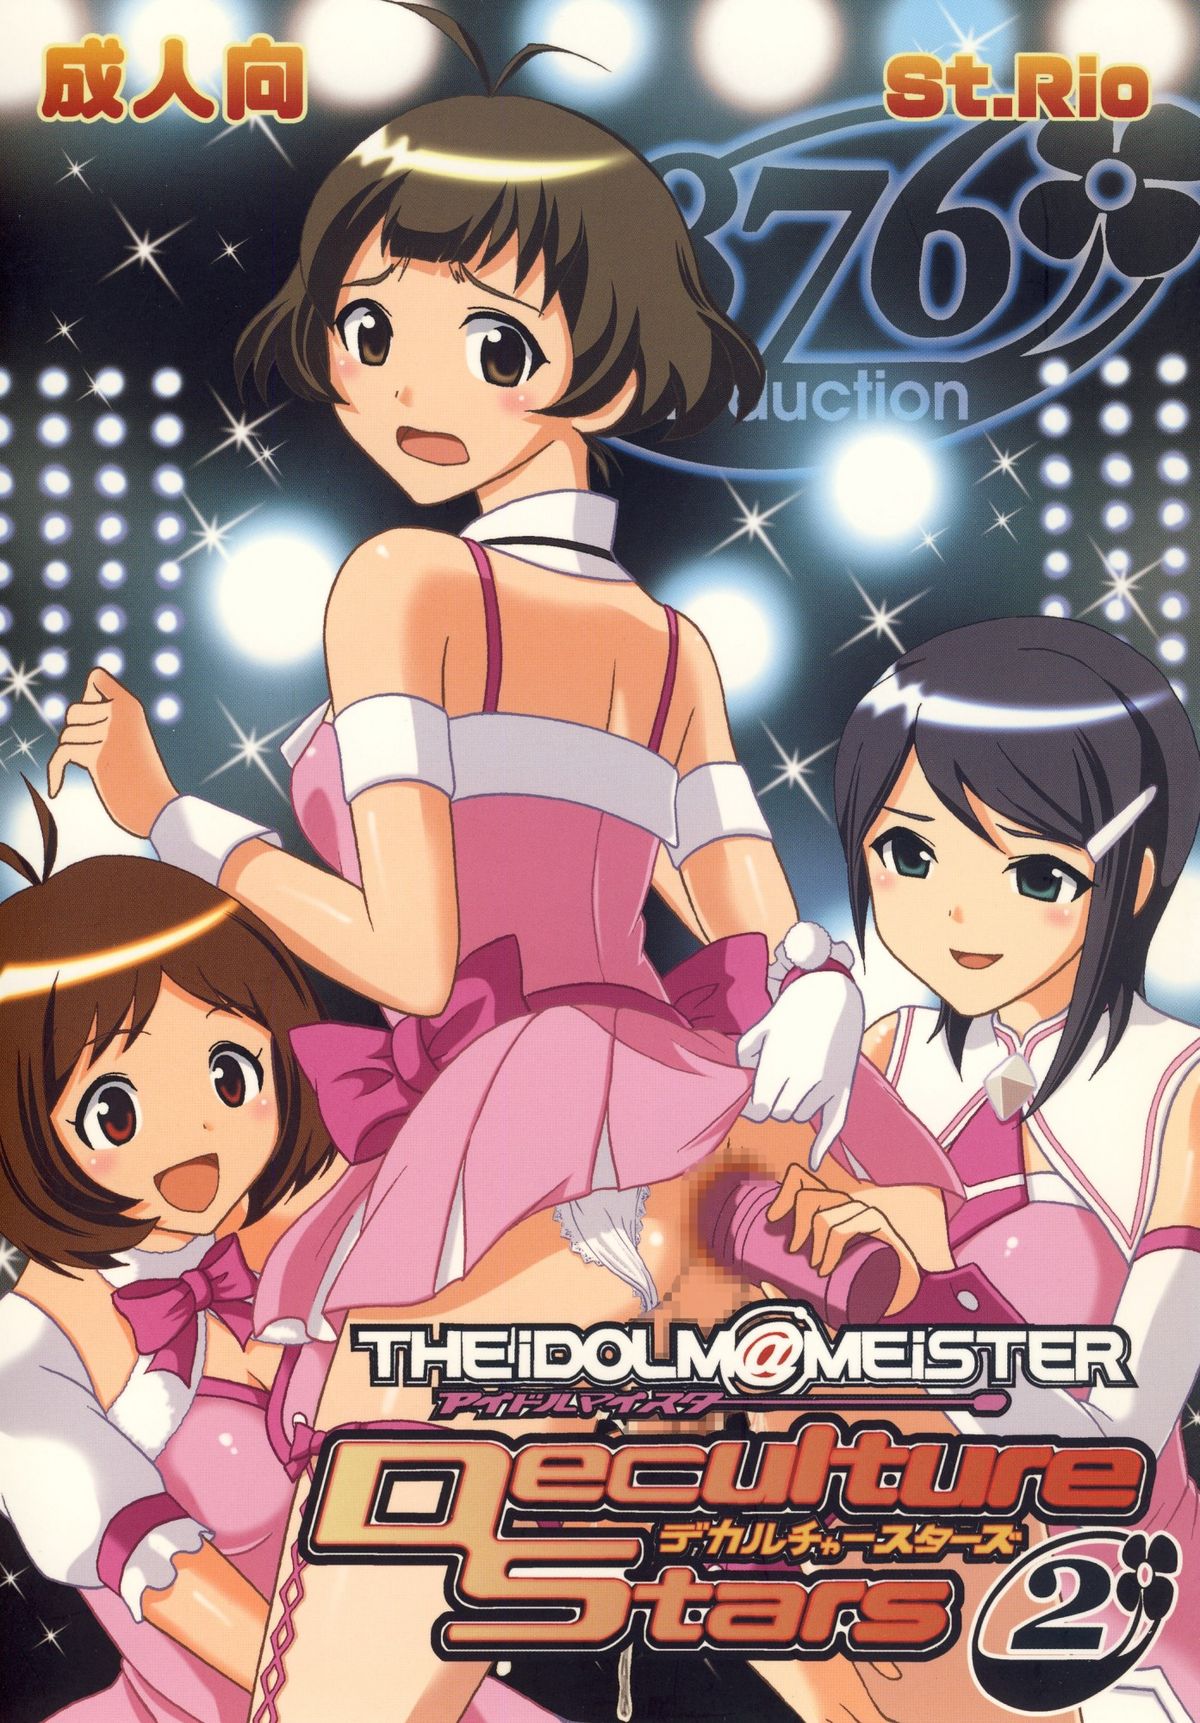 (C77) [St. Rio (Various)] The Idolm@meister Deculture Stars 2 (THE iDOLM@STER) page 1 full